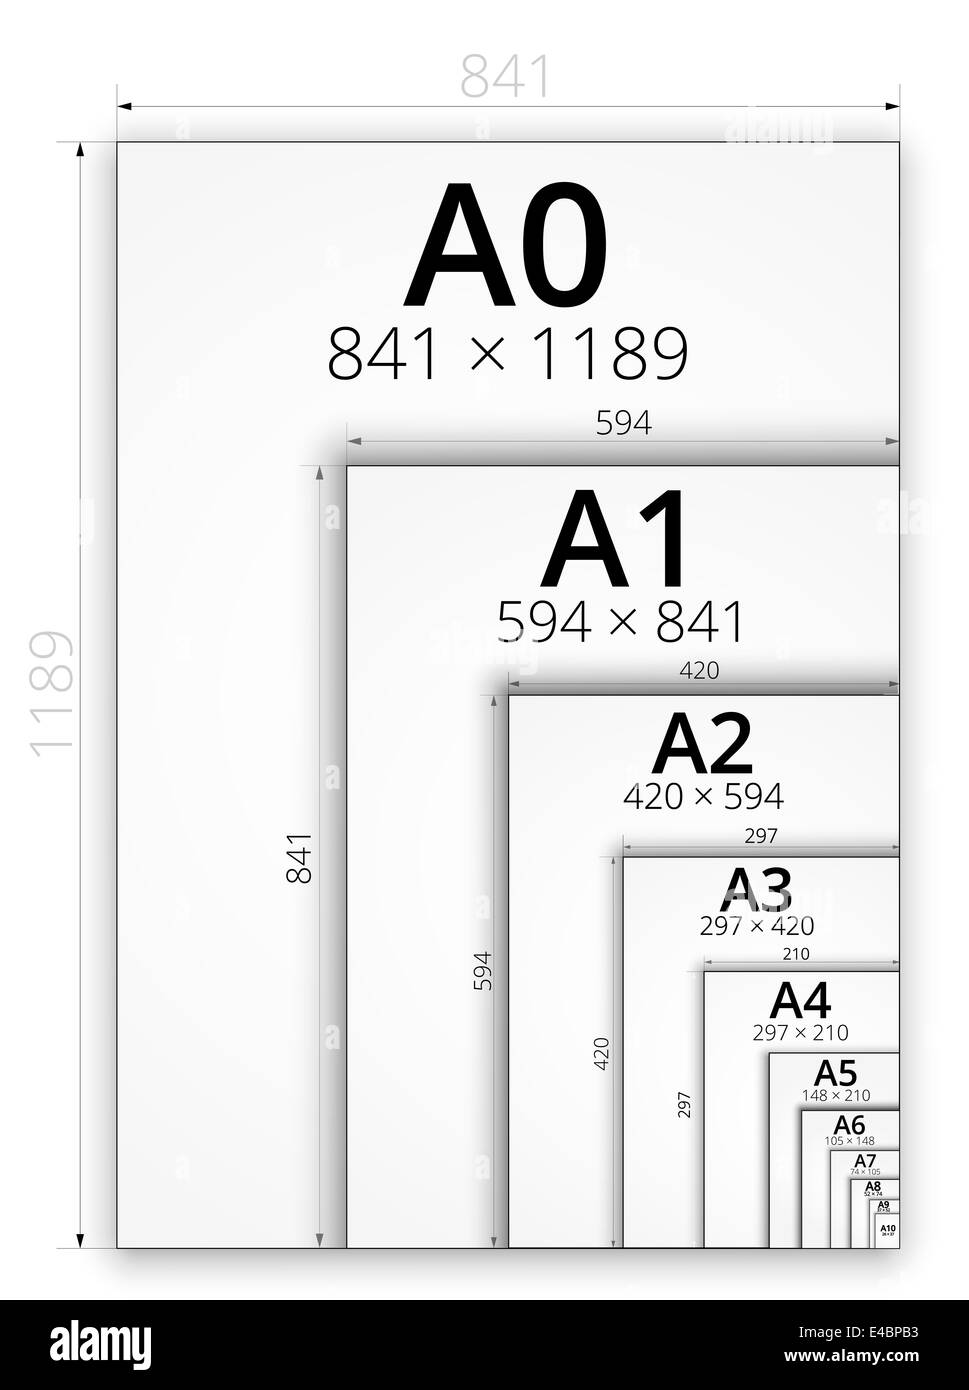 Photographic Paper Sizes Chart